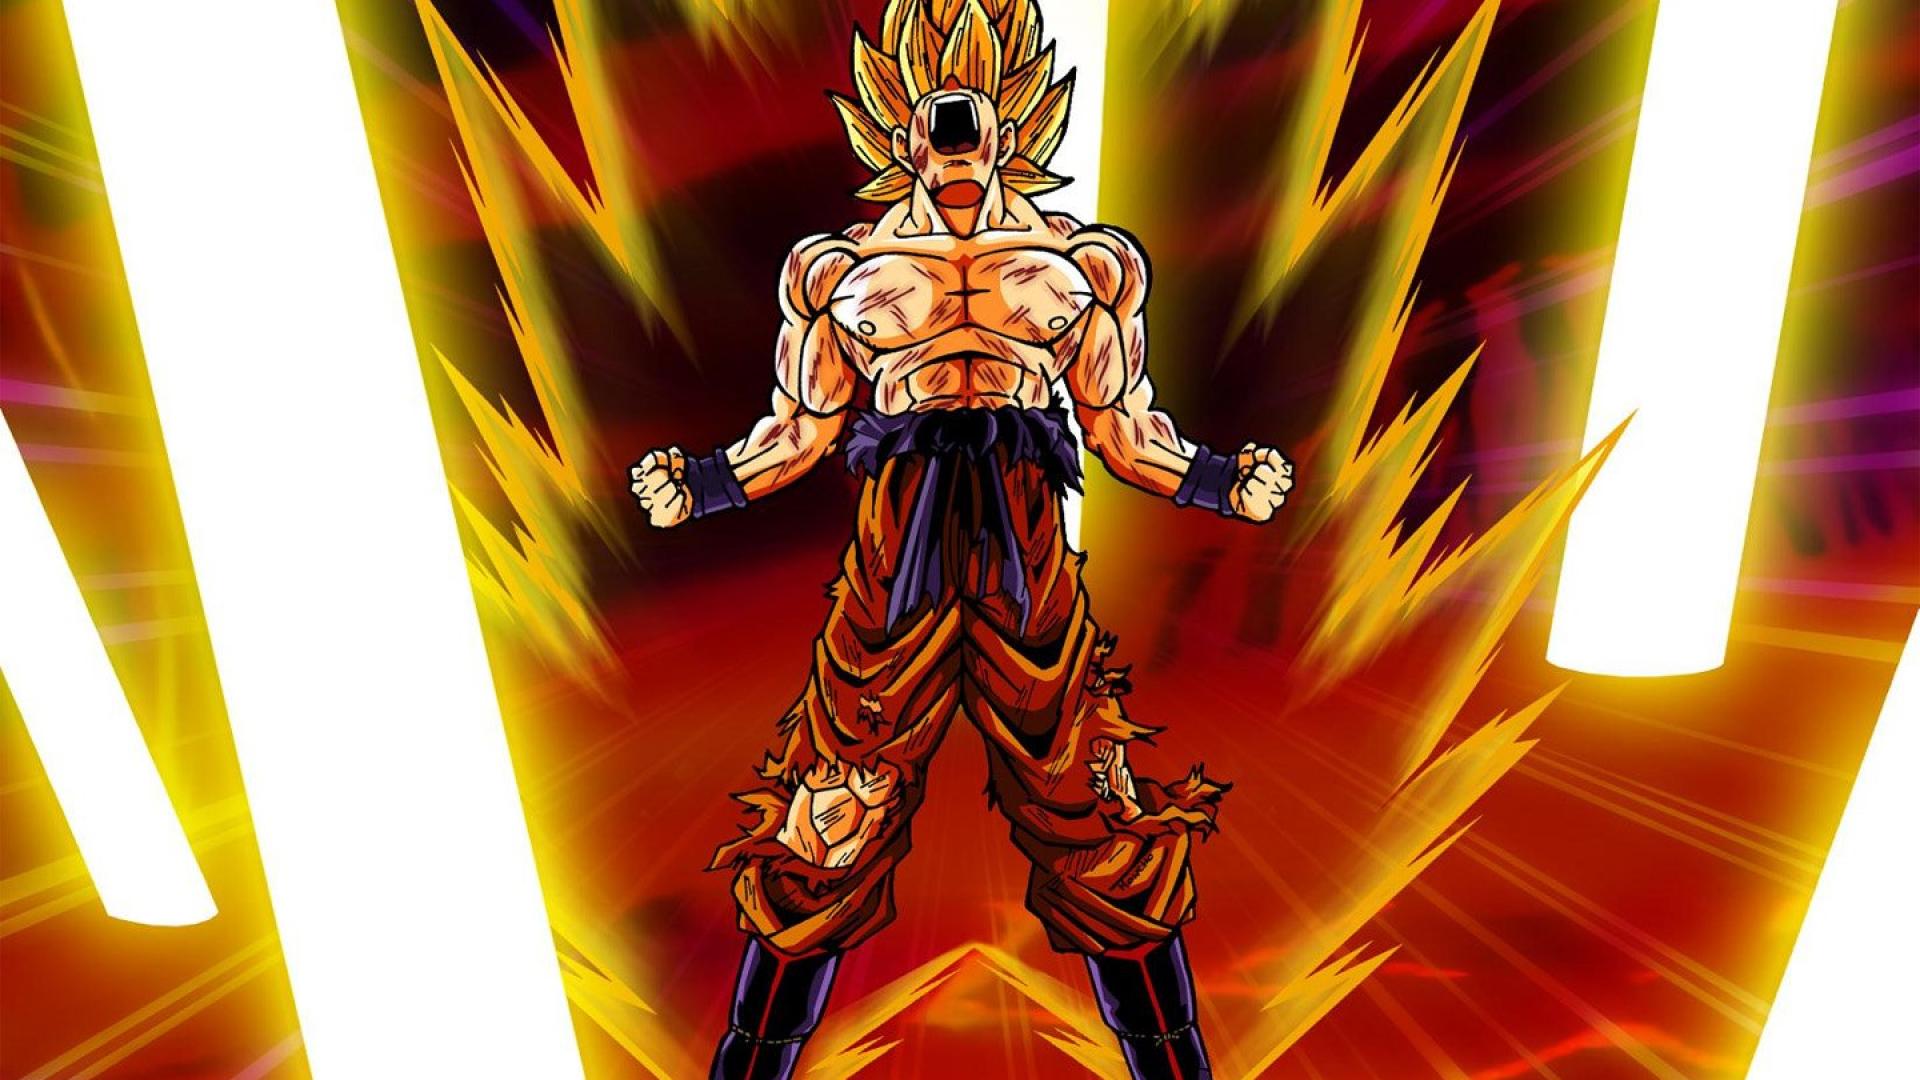 Dragon ball z wallpaper 1440x900 - High Quality and other